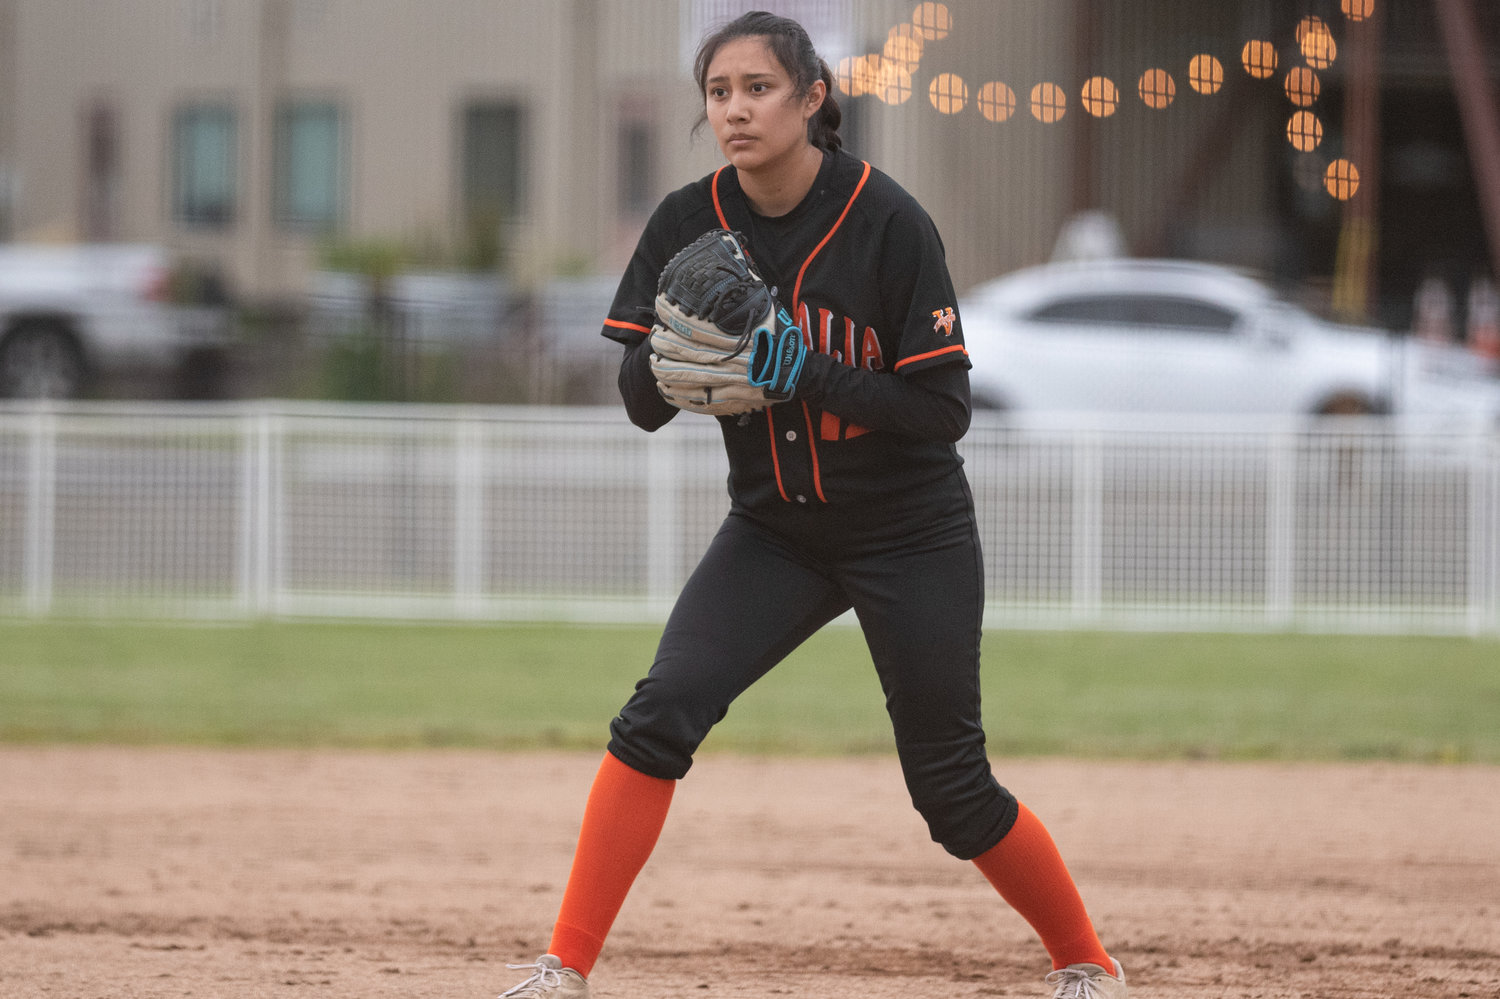 Centralia first baseman Jimena Luis prepares for a pitch and at-bat in the field against Shelton May 2.